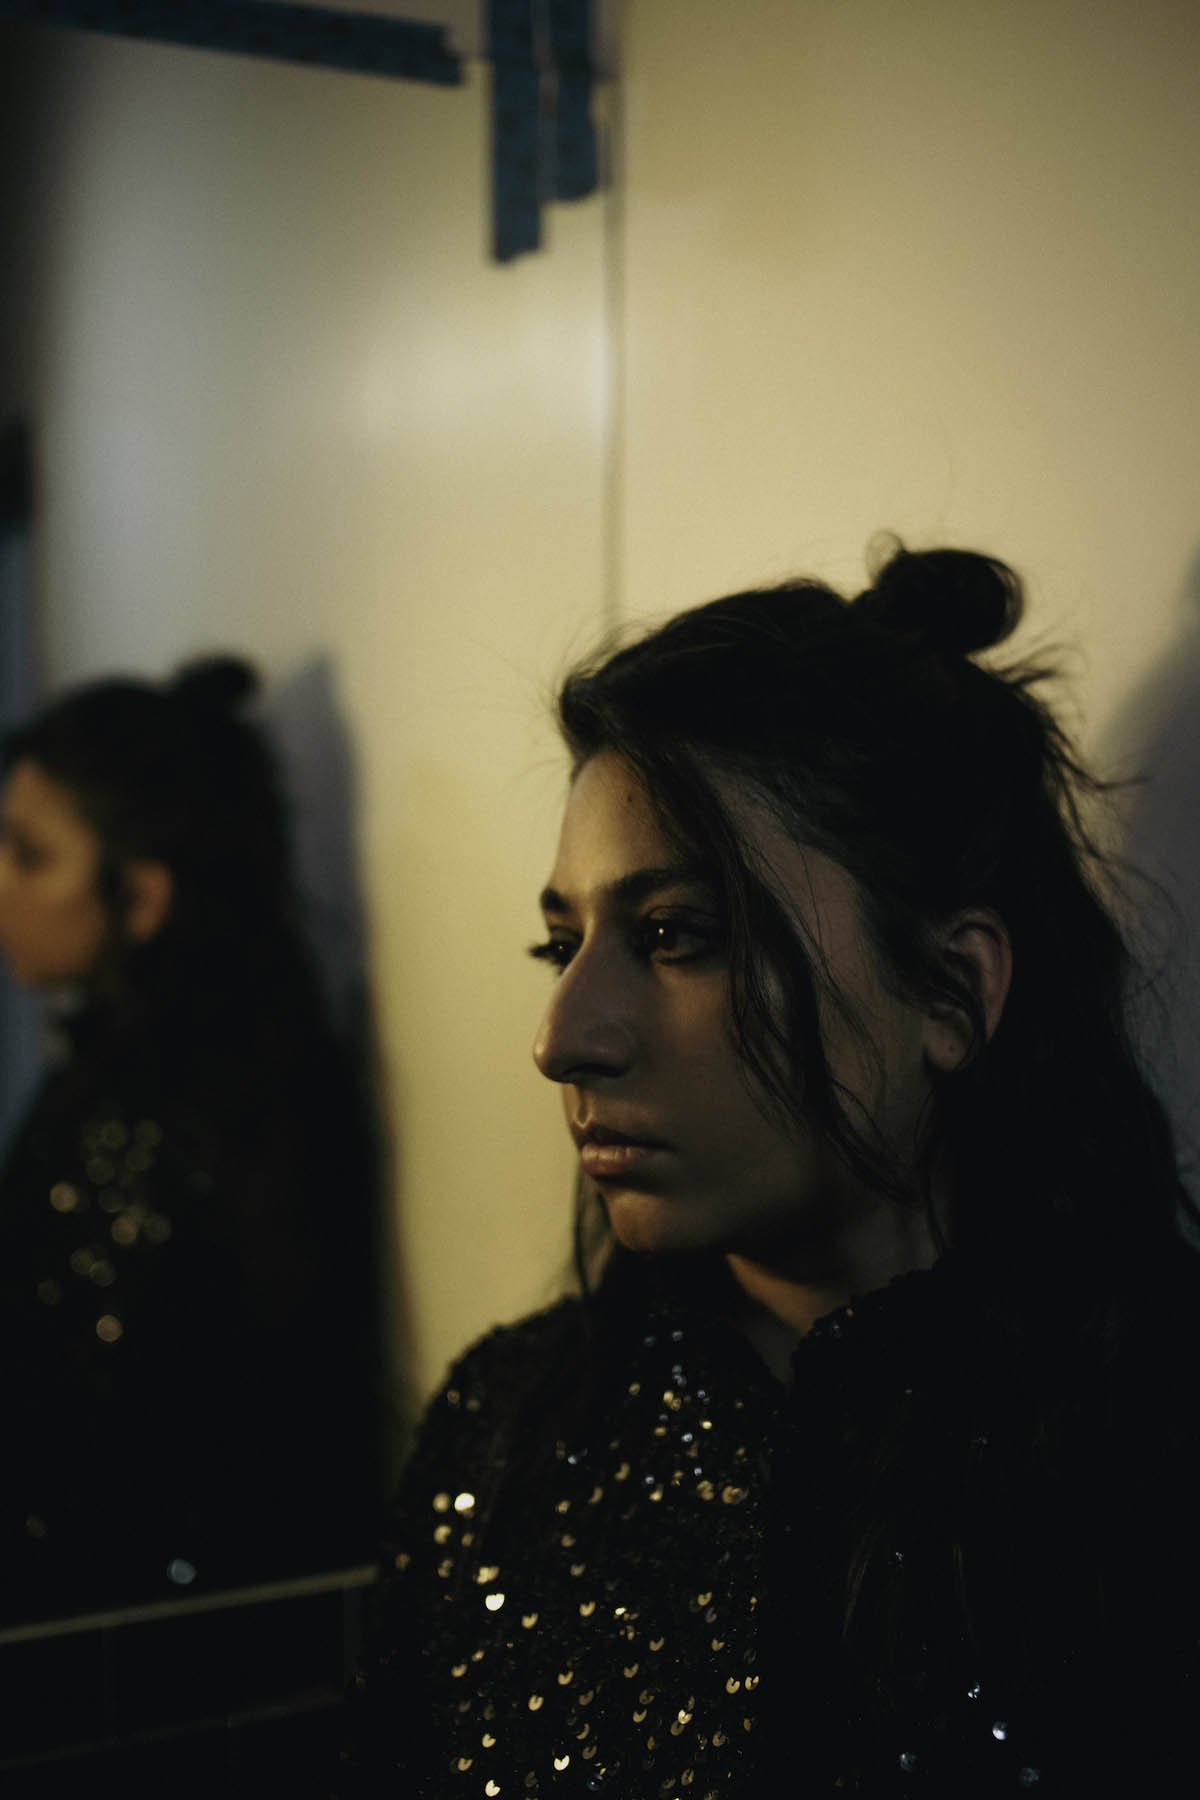 A female person can be seen in a semi-close-up. She wears her black hair tied into a small chignon on the top of her head, long strands fall into her face. Arooj Aftab wears a black top with sequins and collar and looks out of the picture to the left. Behind her hangs a mirror in which her image can be seen out of focus.